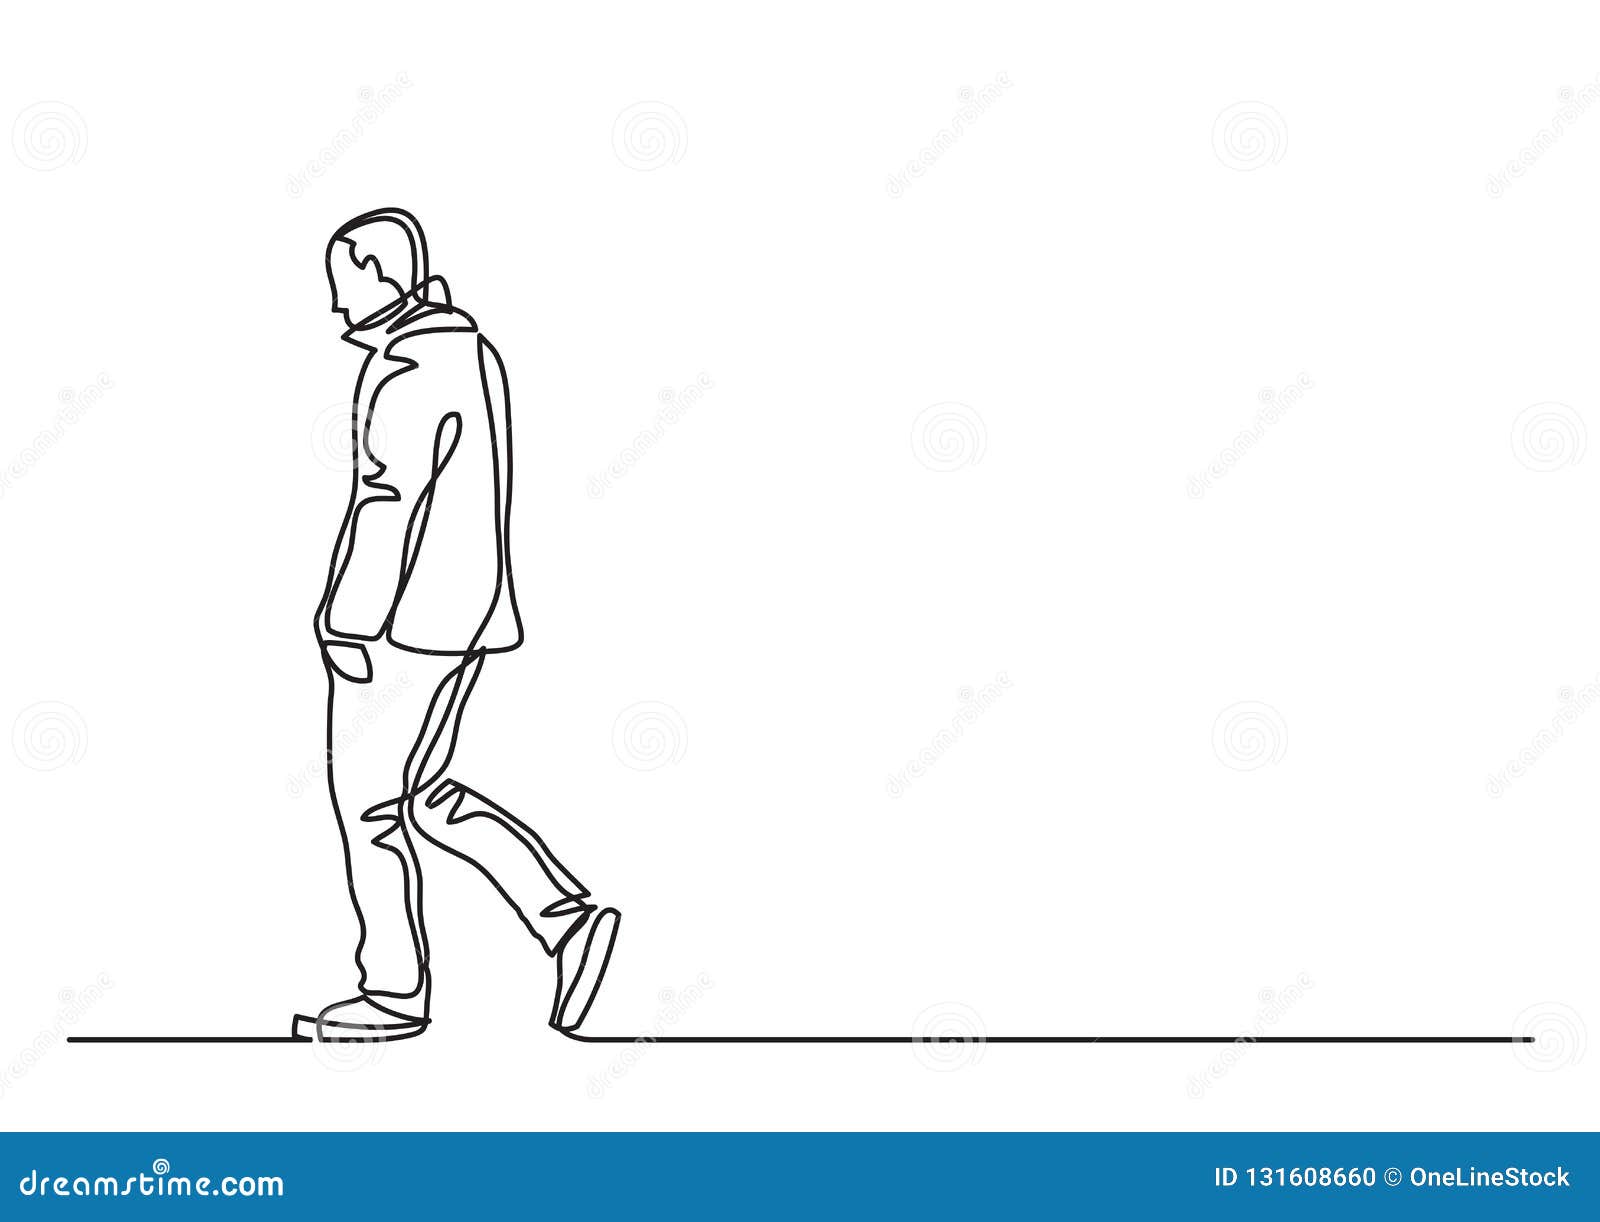 continuous line drawing of lonely walking man